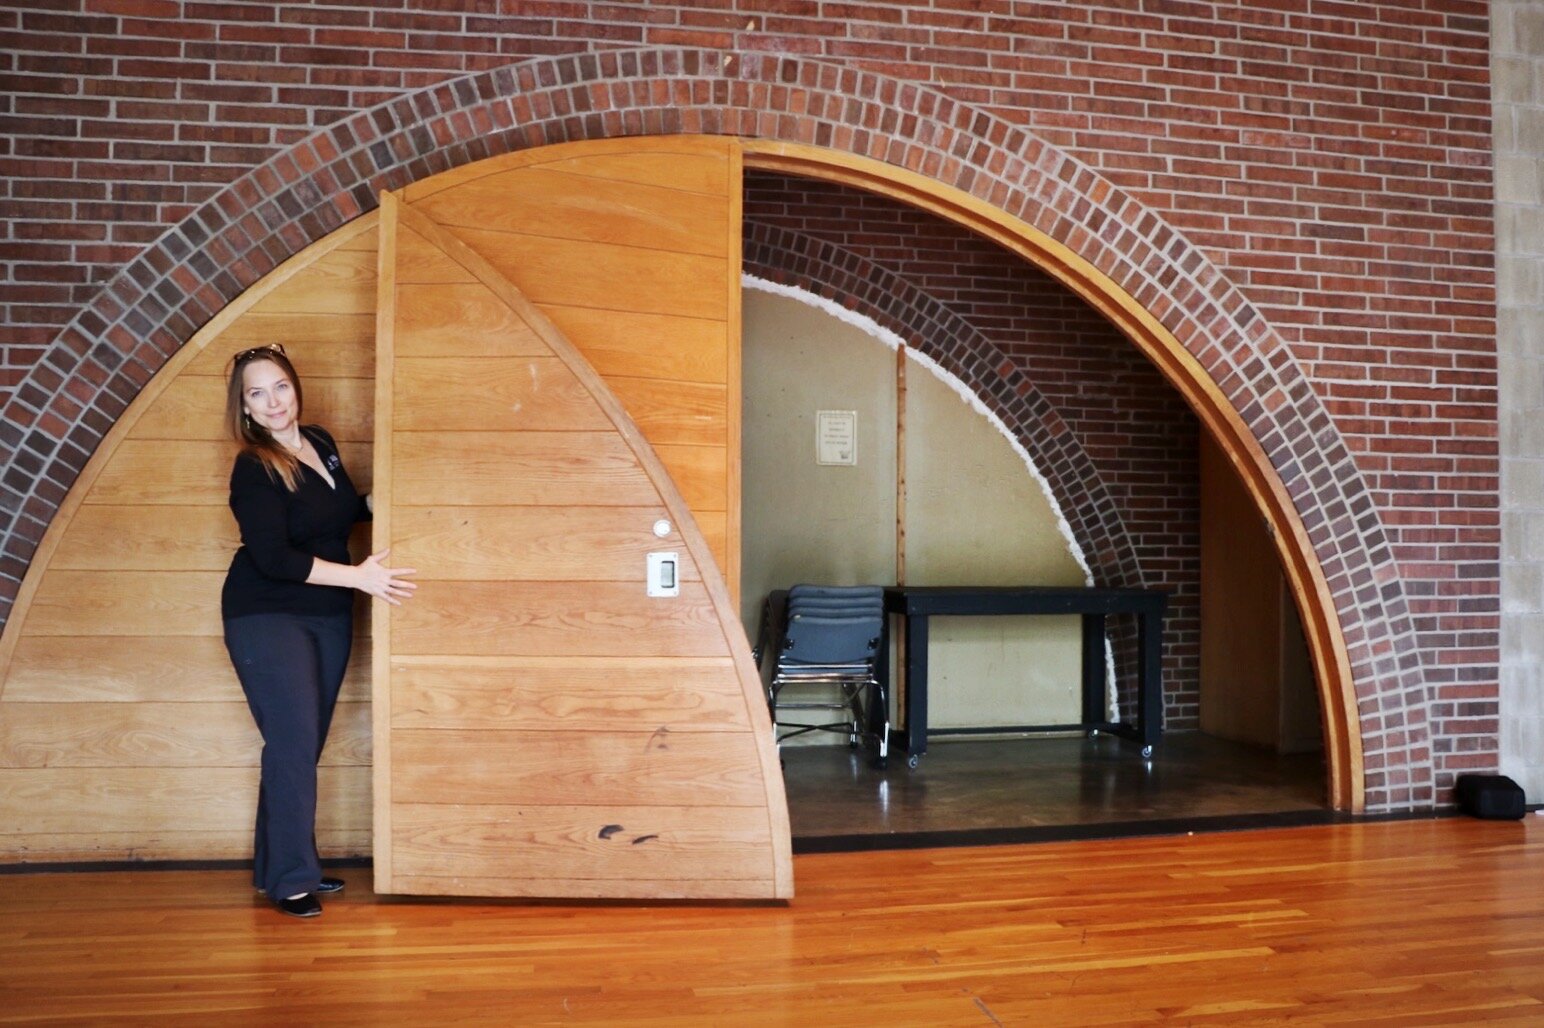 This unique door, inside one of the practice/rehearsal spaces at the Arts United Center, is filled with gravel for weight, and it fits perfectly inside one of the brick archways.